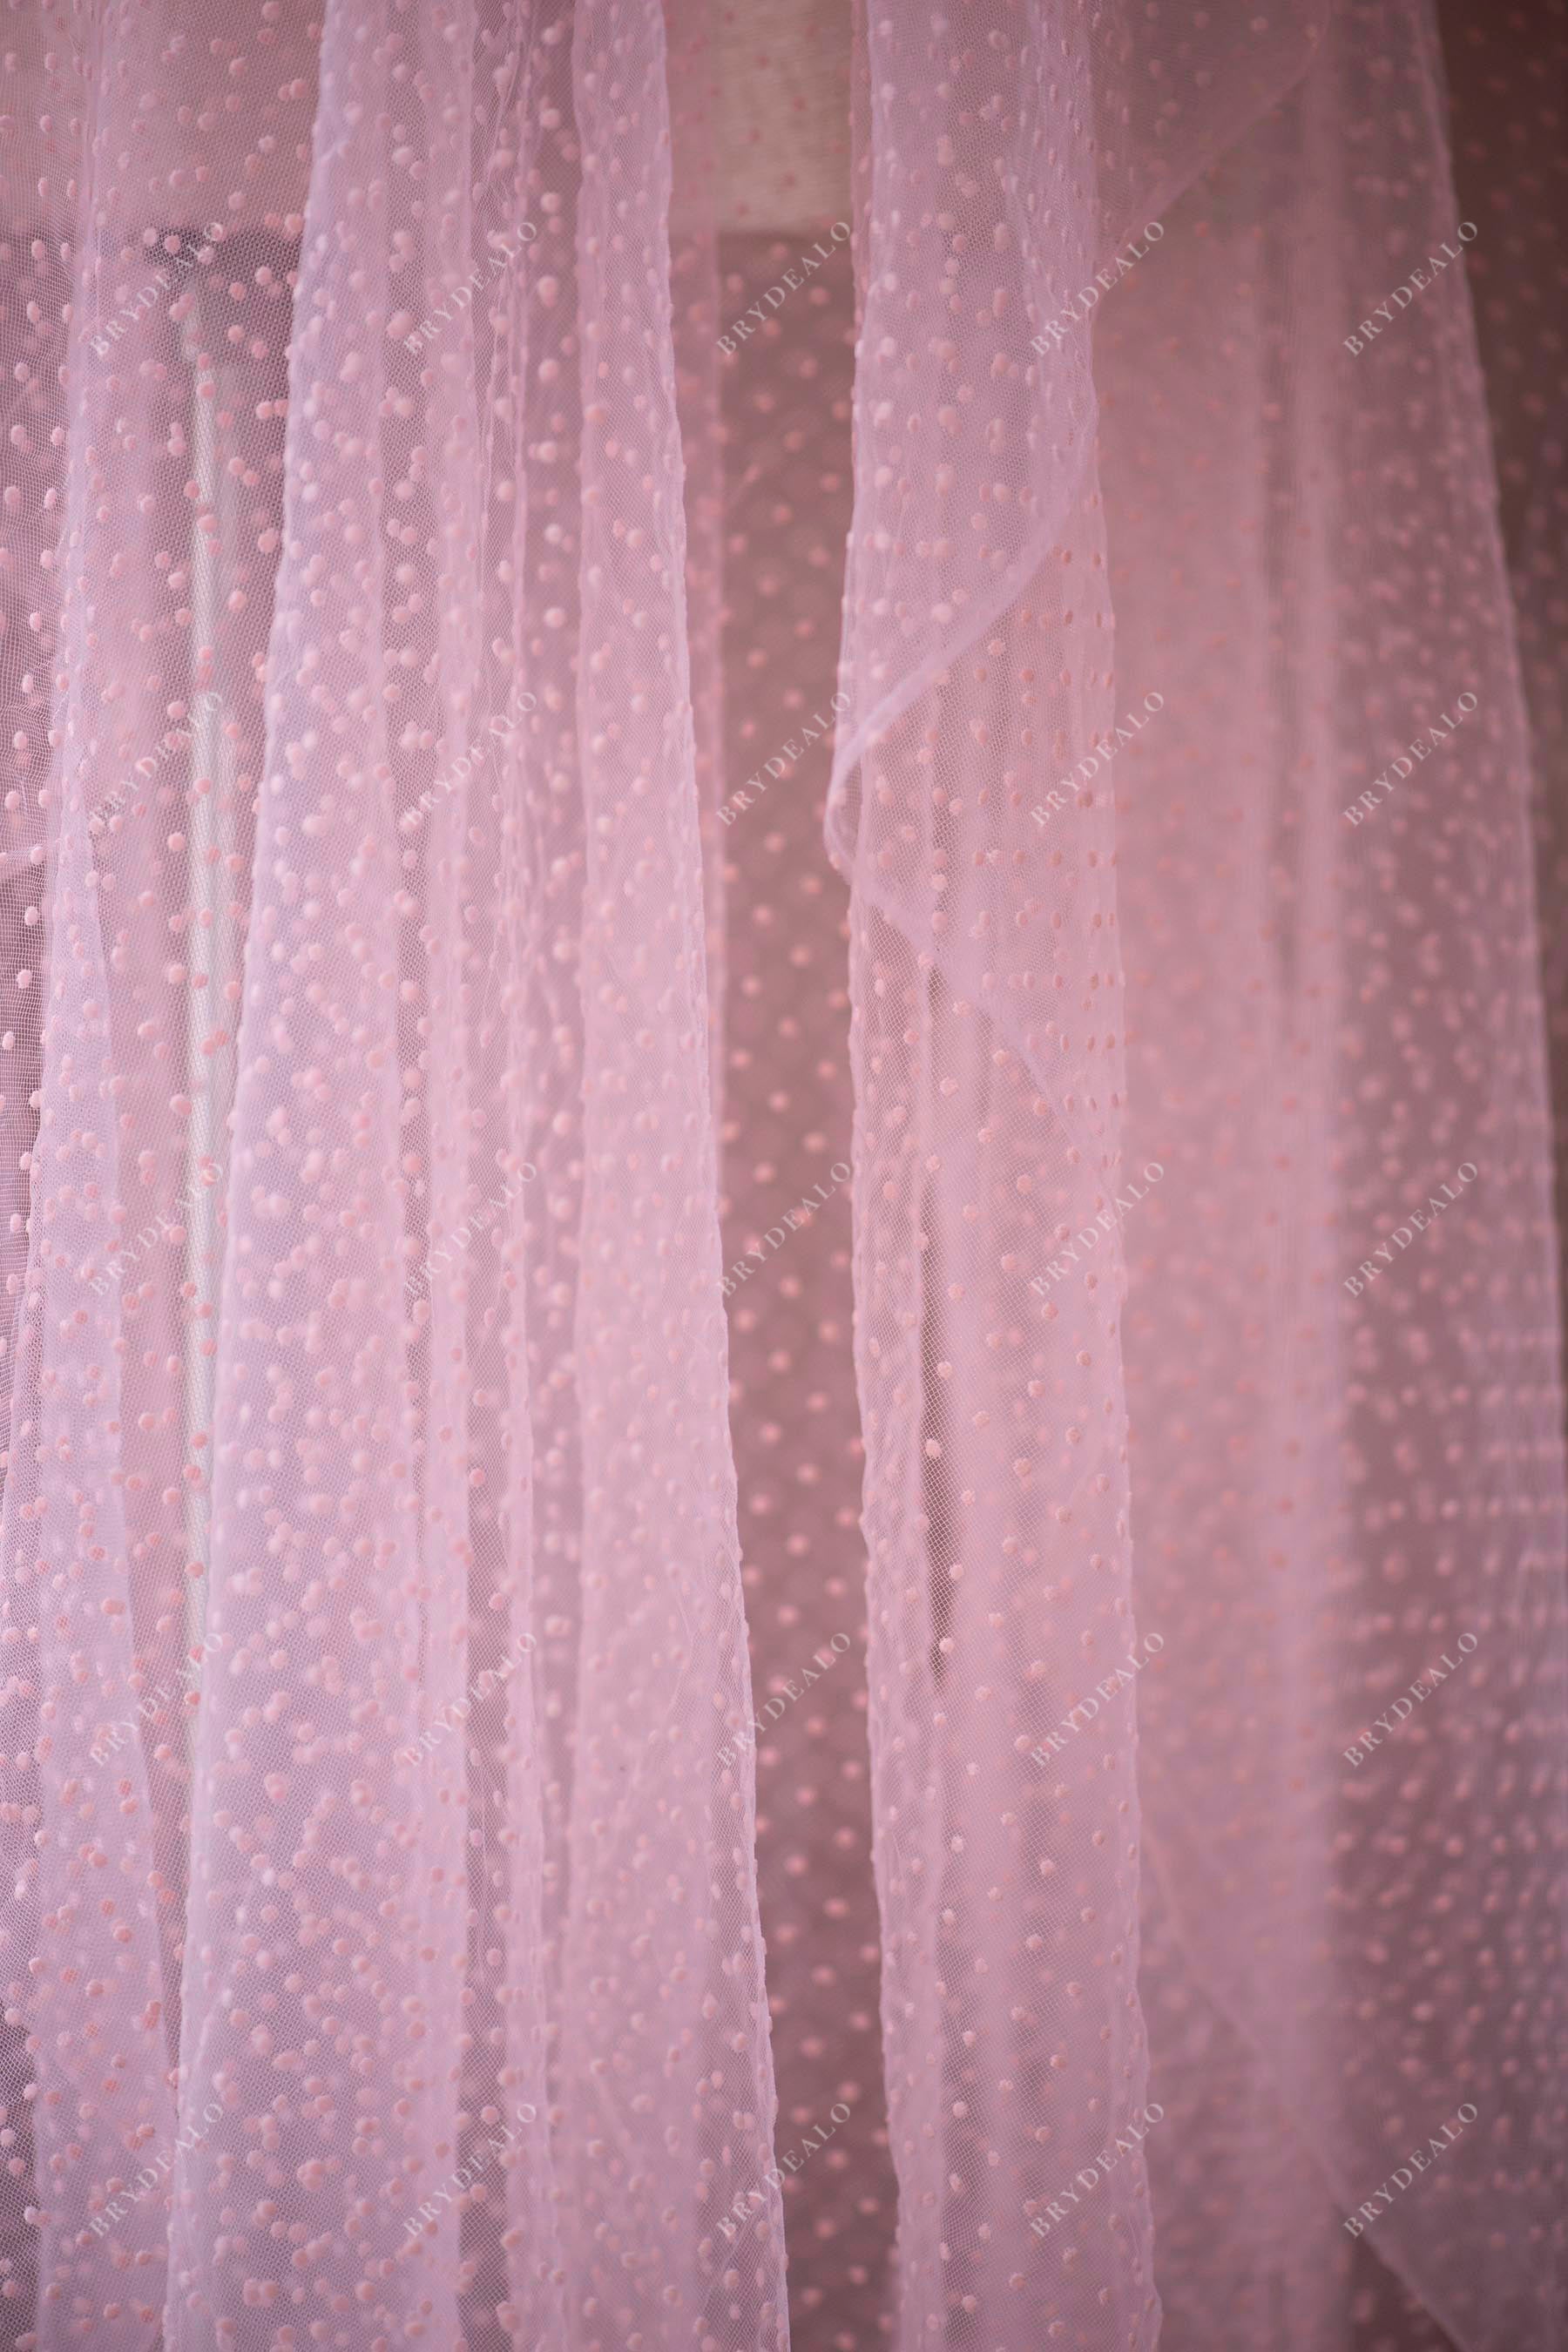 Best Pink Polka Dot Mesh Lace Fabric Online